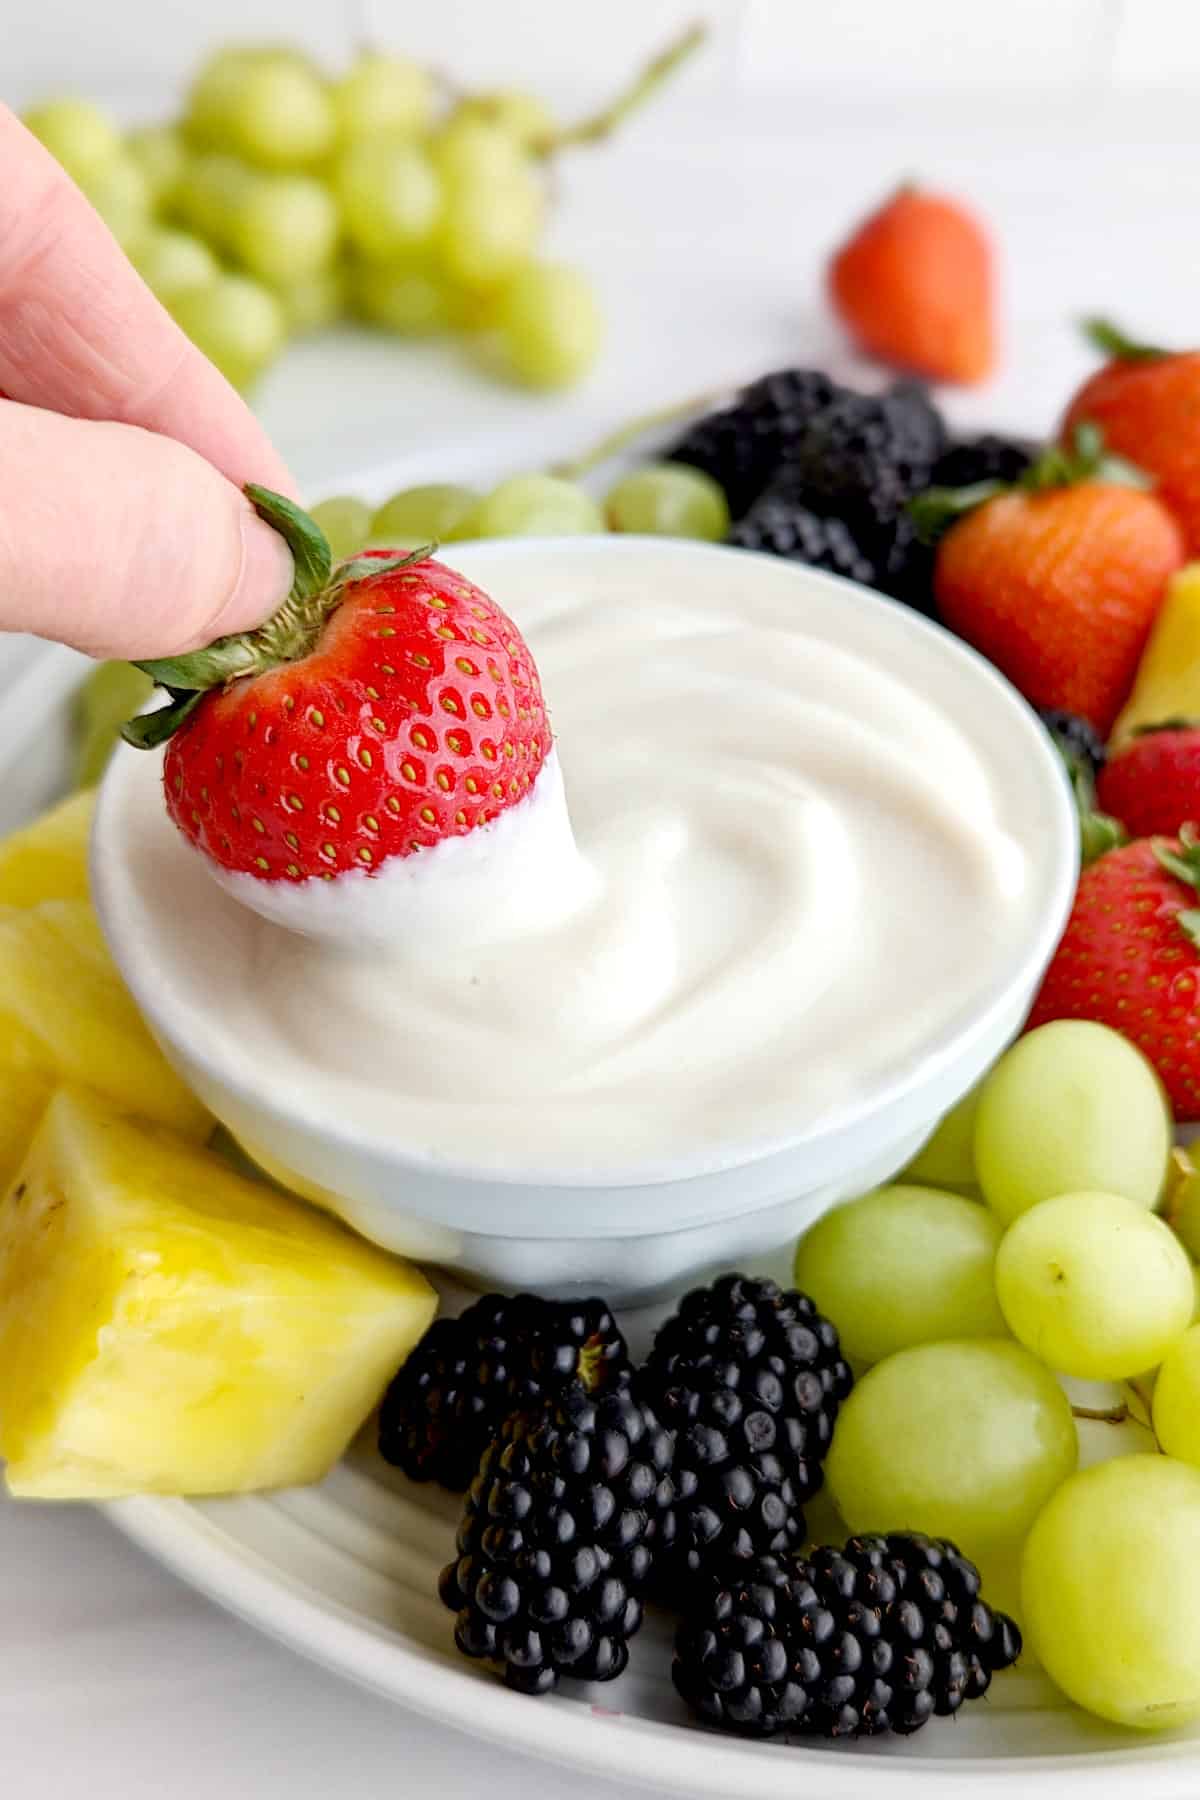 A hand dipping a strawberry into a bowl of vegan fruit dip.